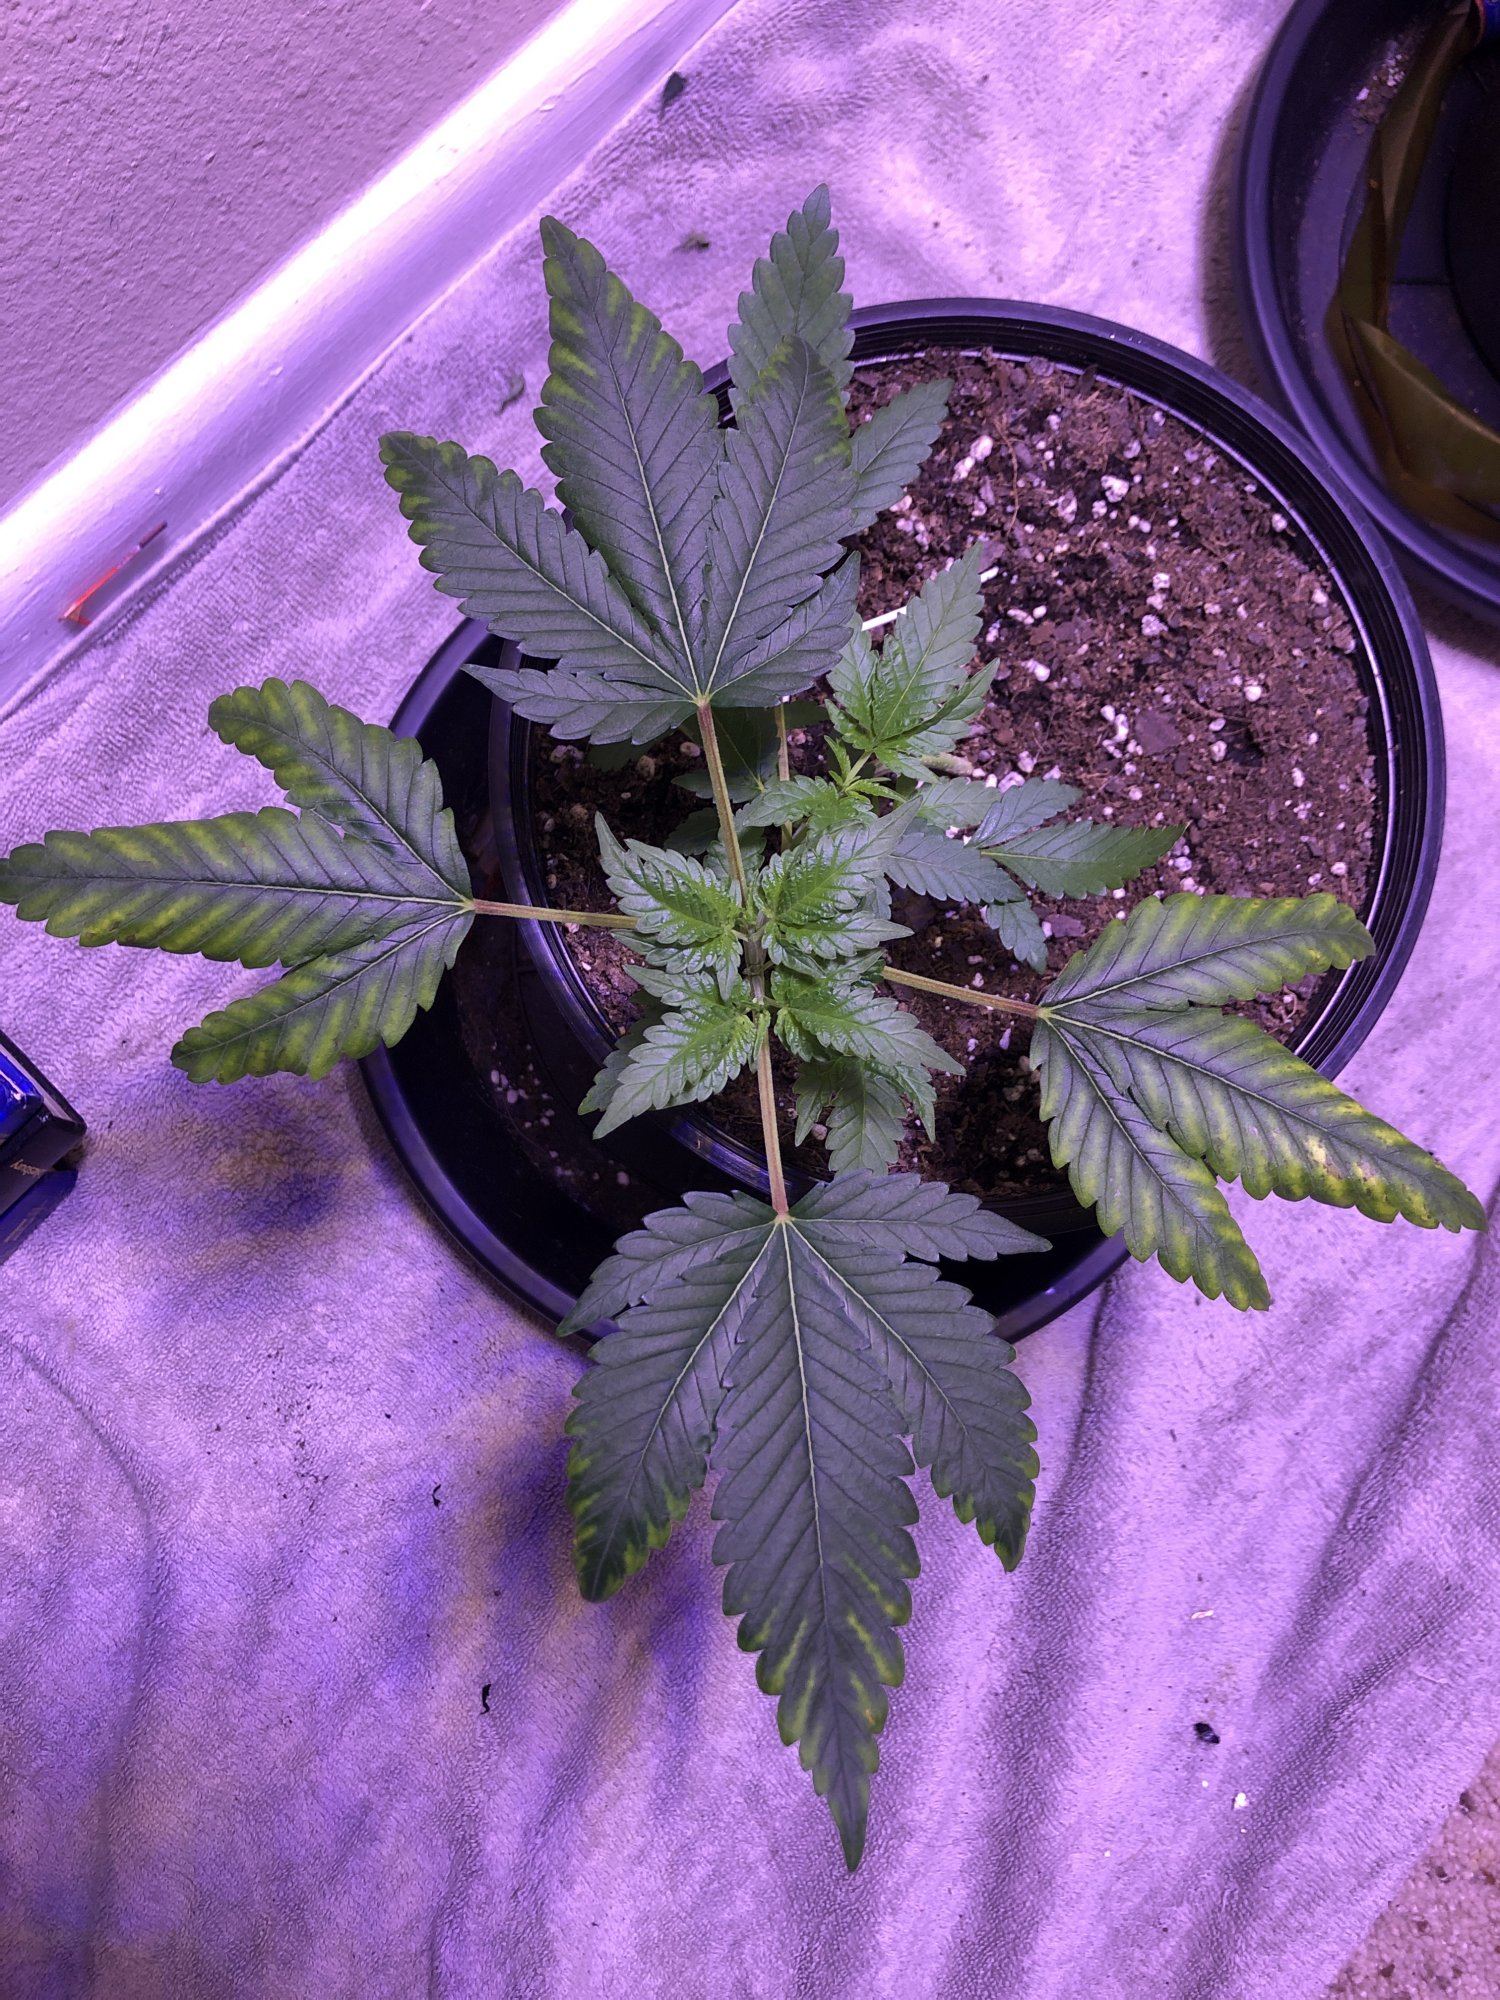 Please help the leaves are turning a weird yellowbrown